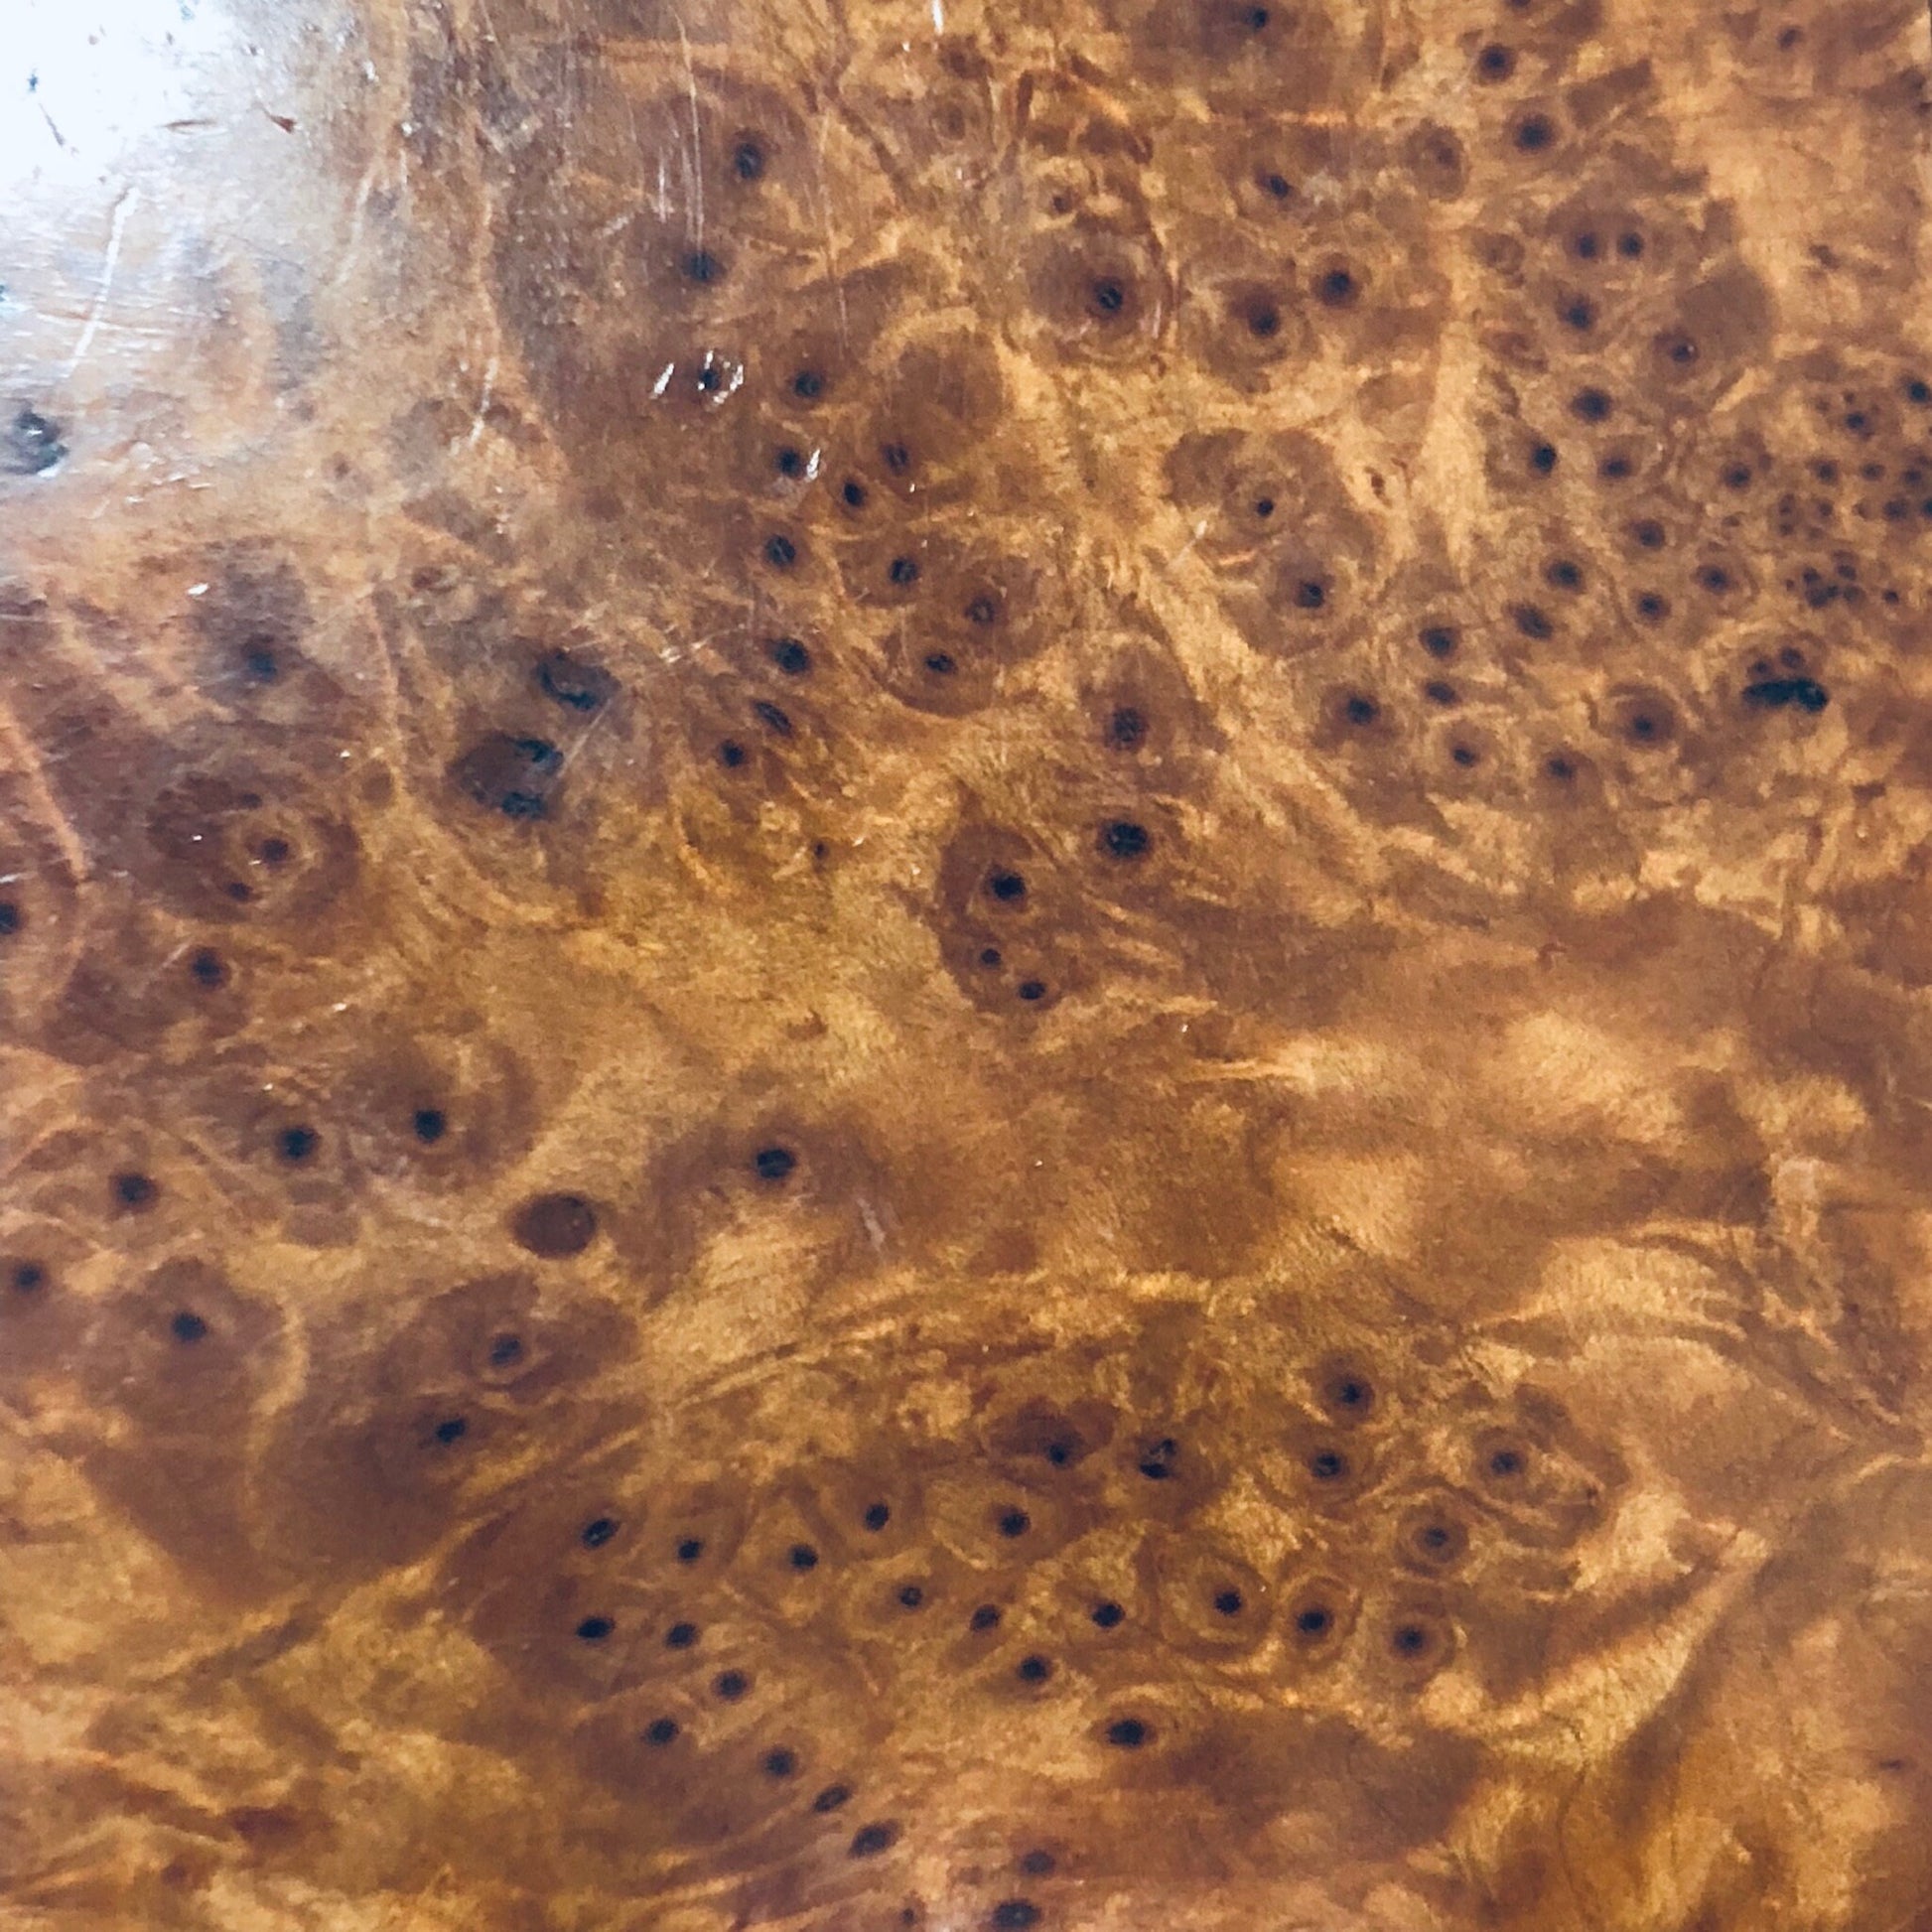 Closeup texture of light brown burl wood with knots and swirling grain pattern